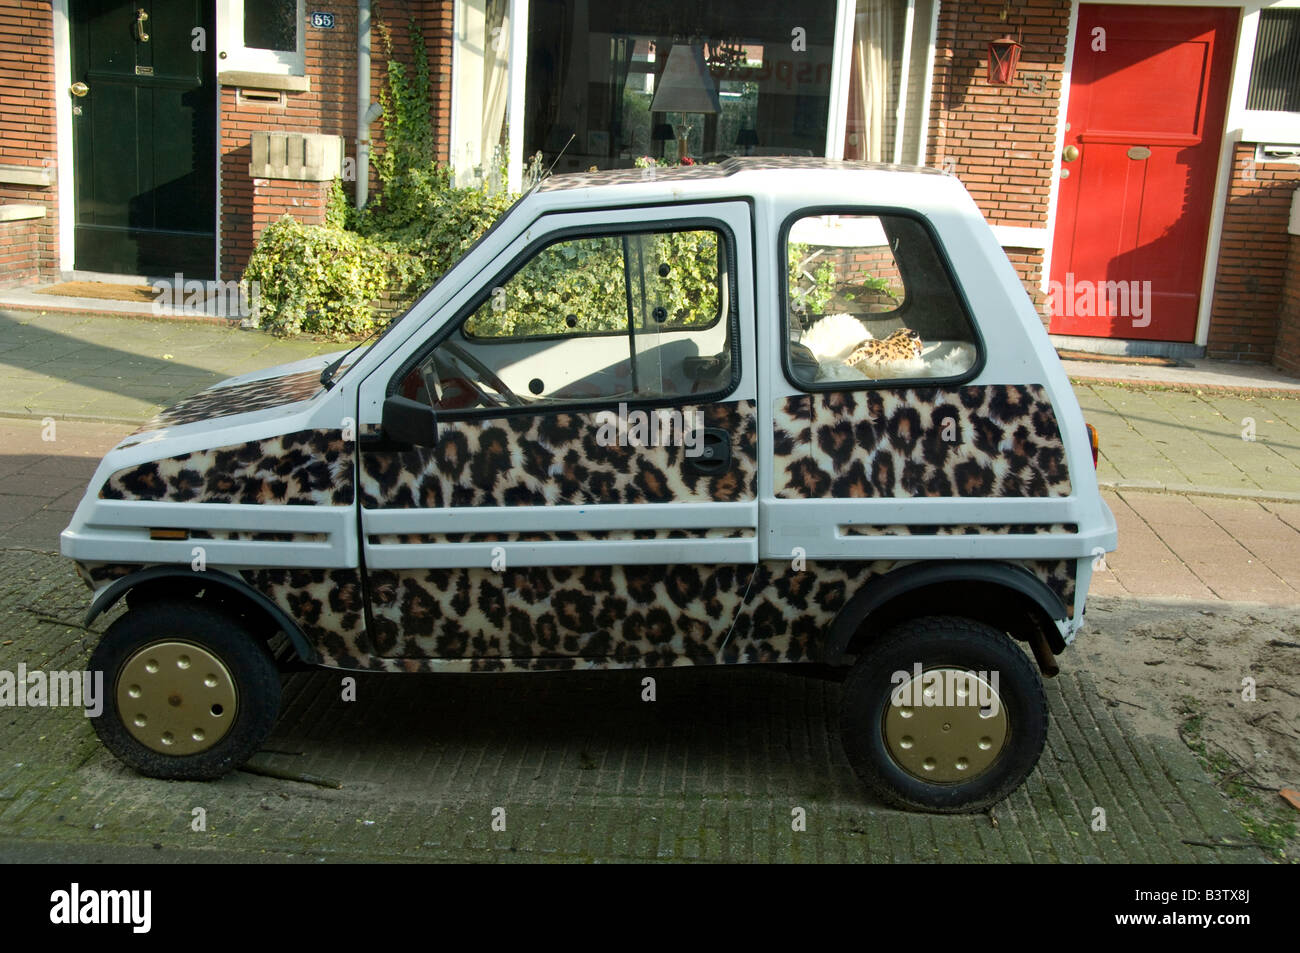 Europe, The Netherlands (aka Holland), Amsterdam. Leopard painted Smart Car. Stock Photo